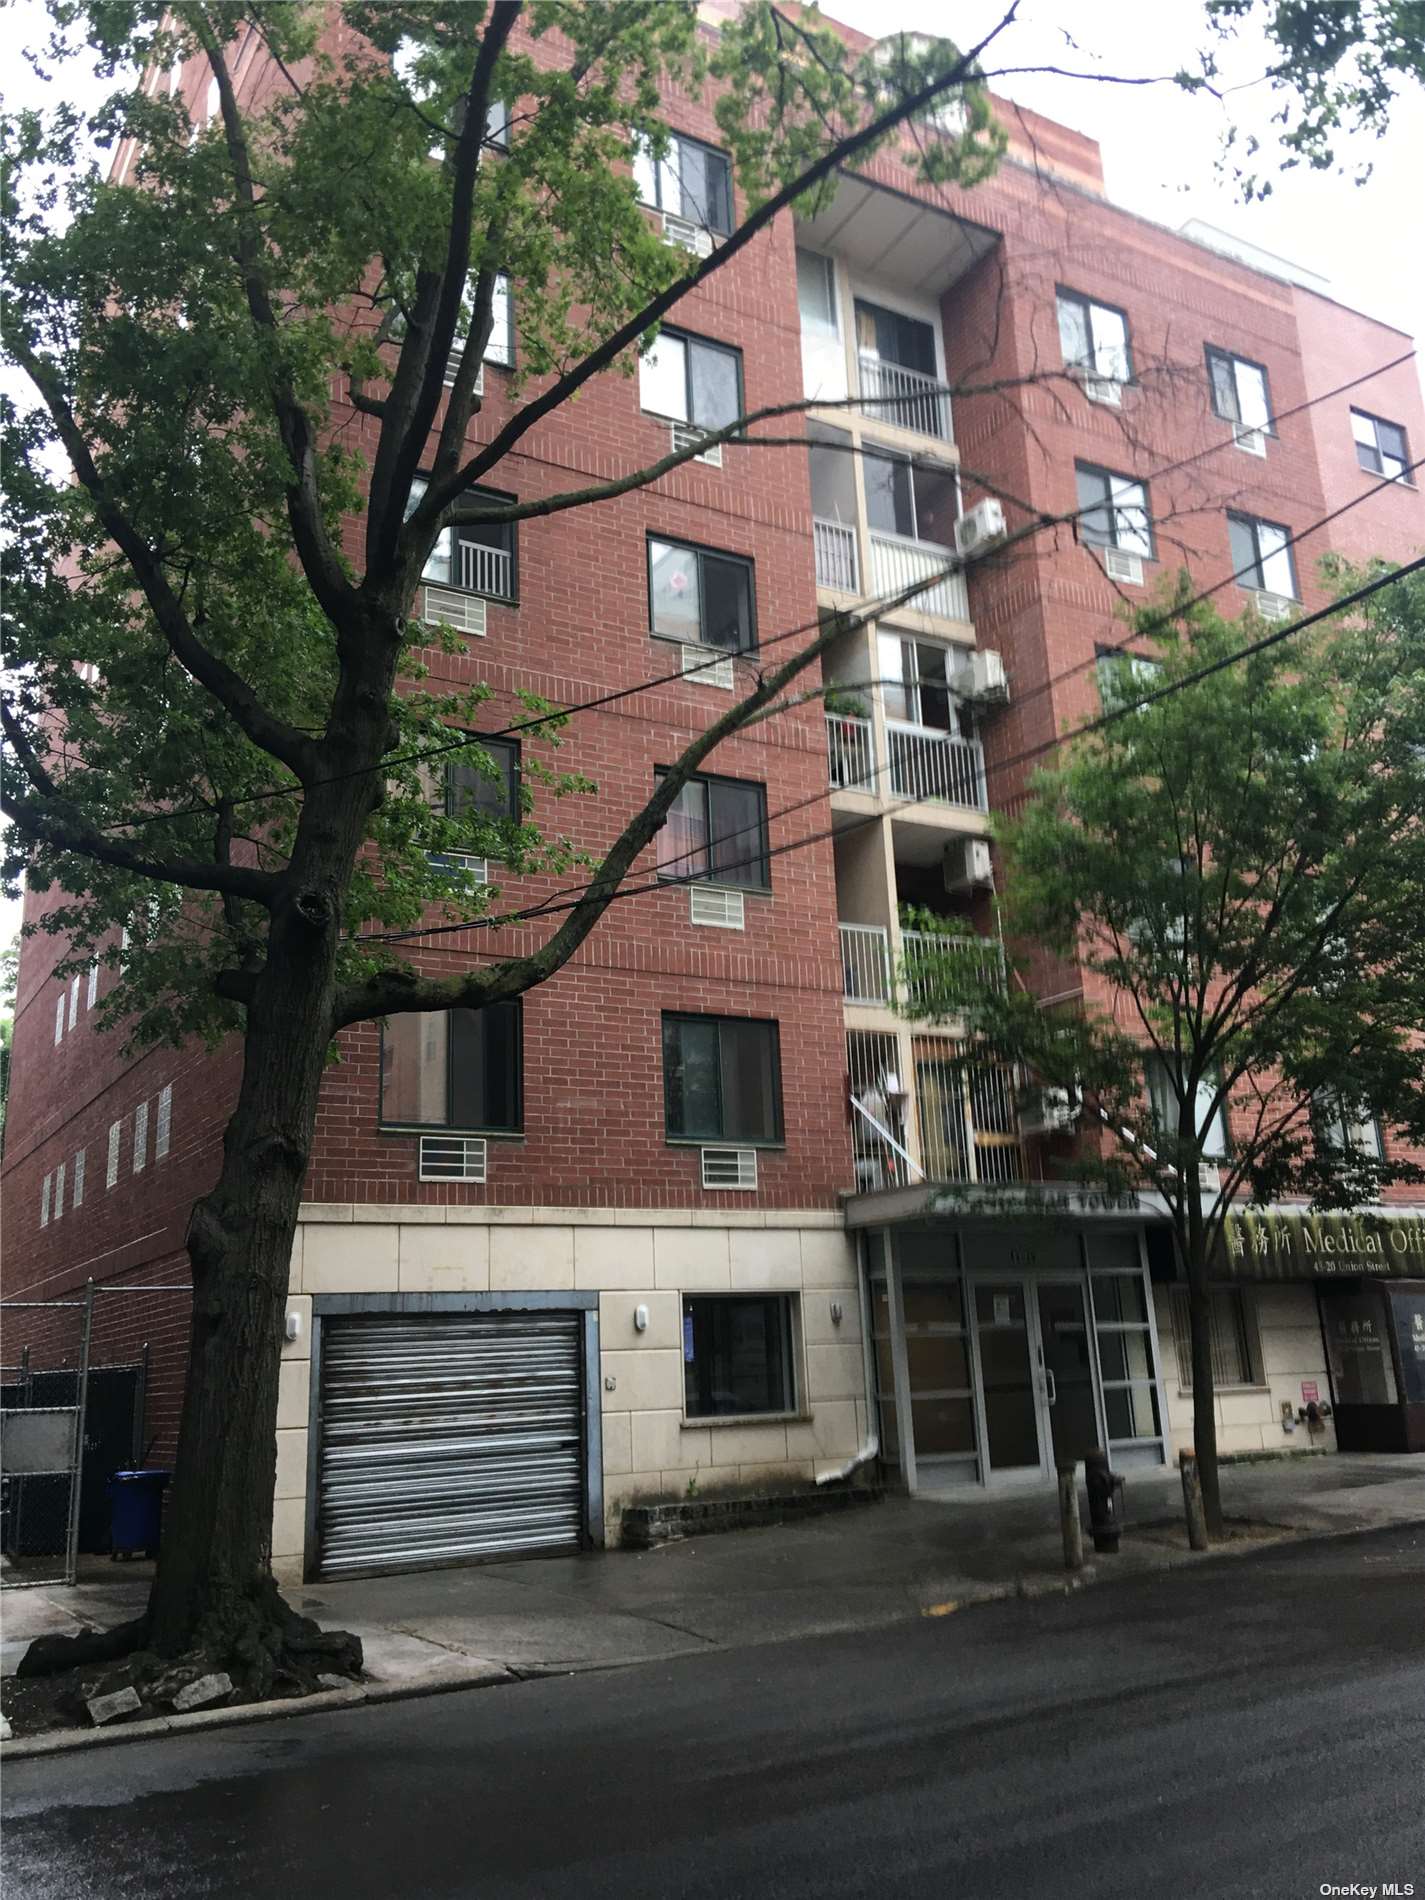 Condo in Flushing - Union  Queens, NY 11355